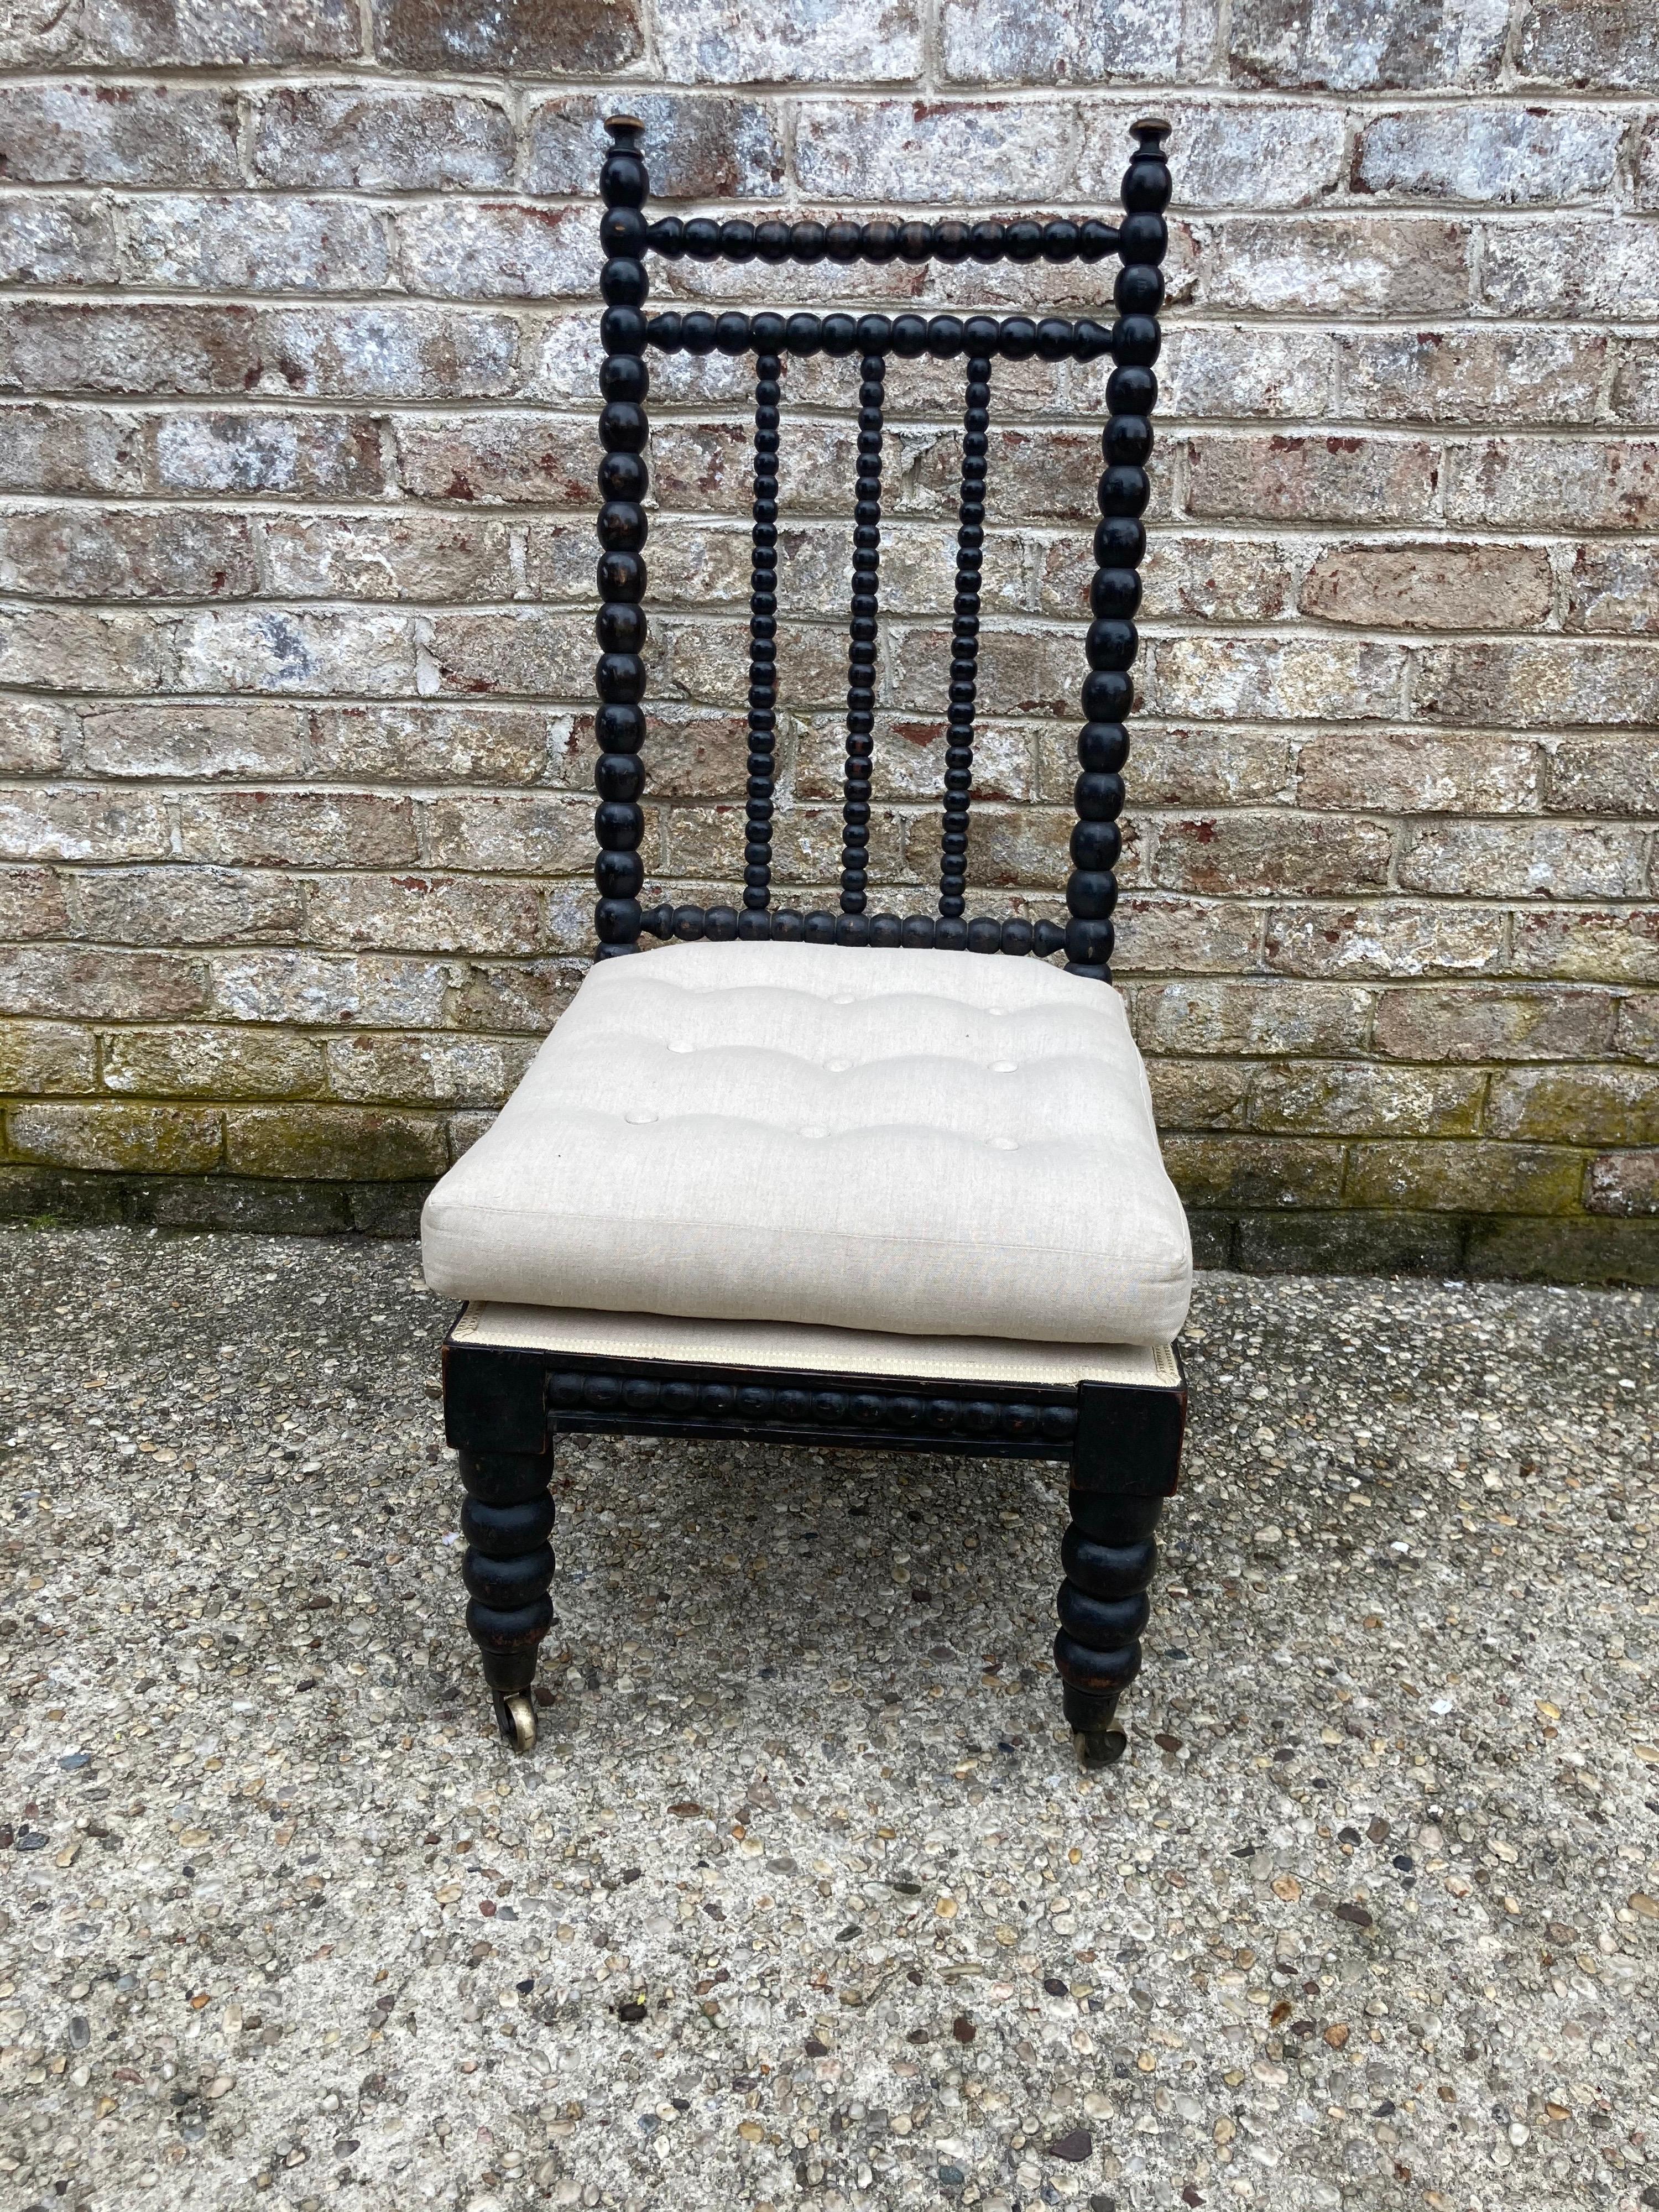 Irish Spool or bobbin or turned wood chair circa 19th c.... black worn finish.... upholstered in a off white linen with a tufted pillow seat and matching decking....